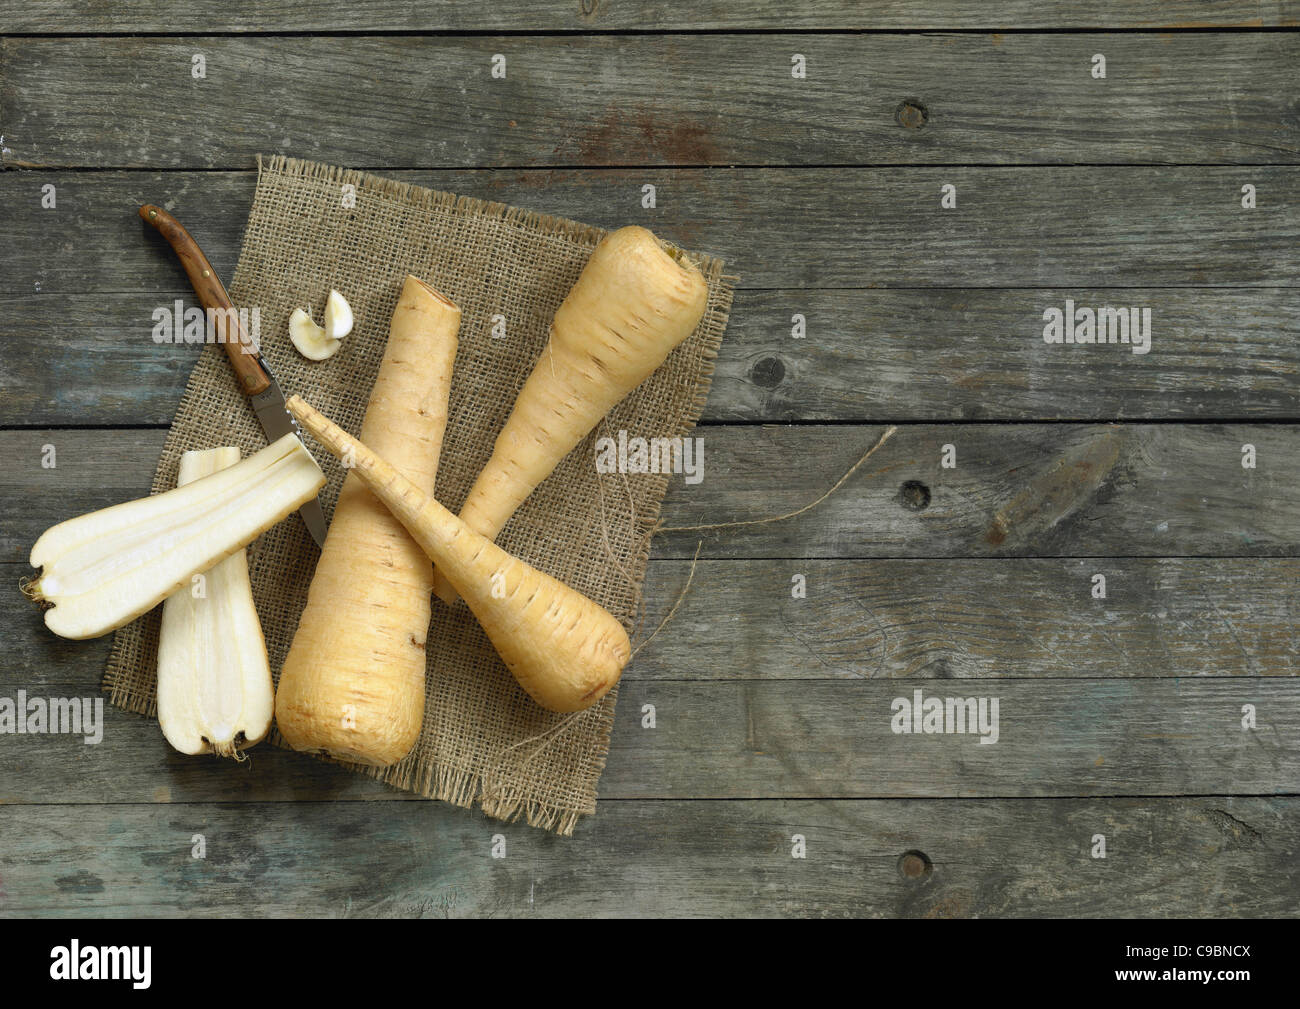 Parsnips with knife on wooden table Stock Photo